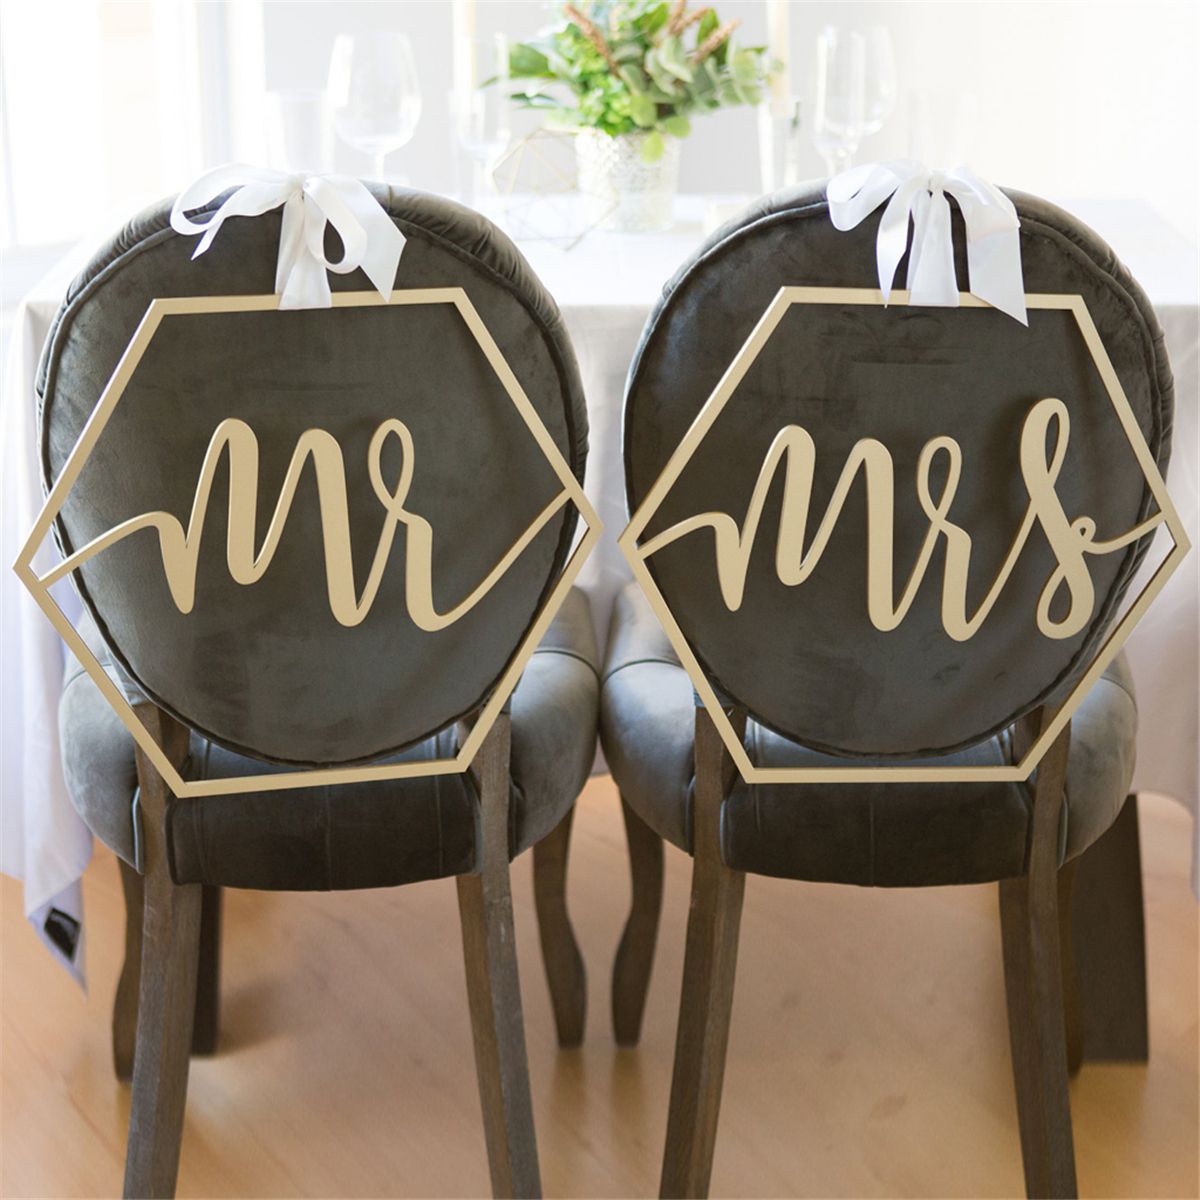 Mr-amp-Mrs-Wedding-Bride-Groom-Chair-Signs-Set-Hanging-Wooden-Party-Decorations-1468289